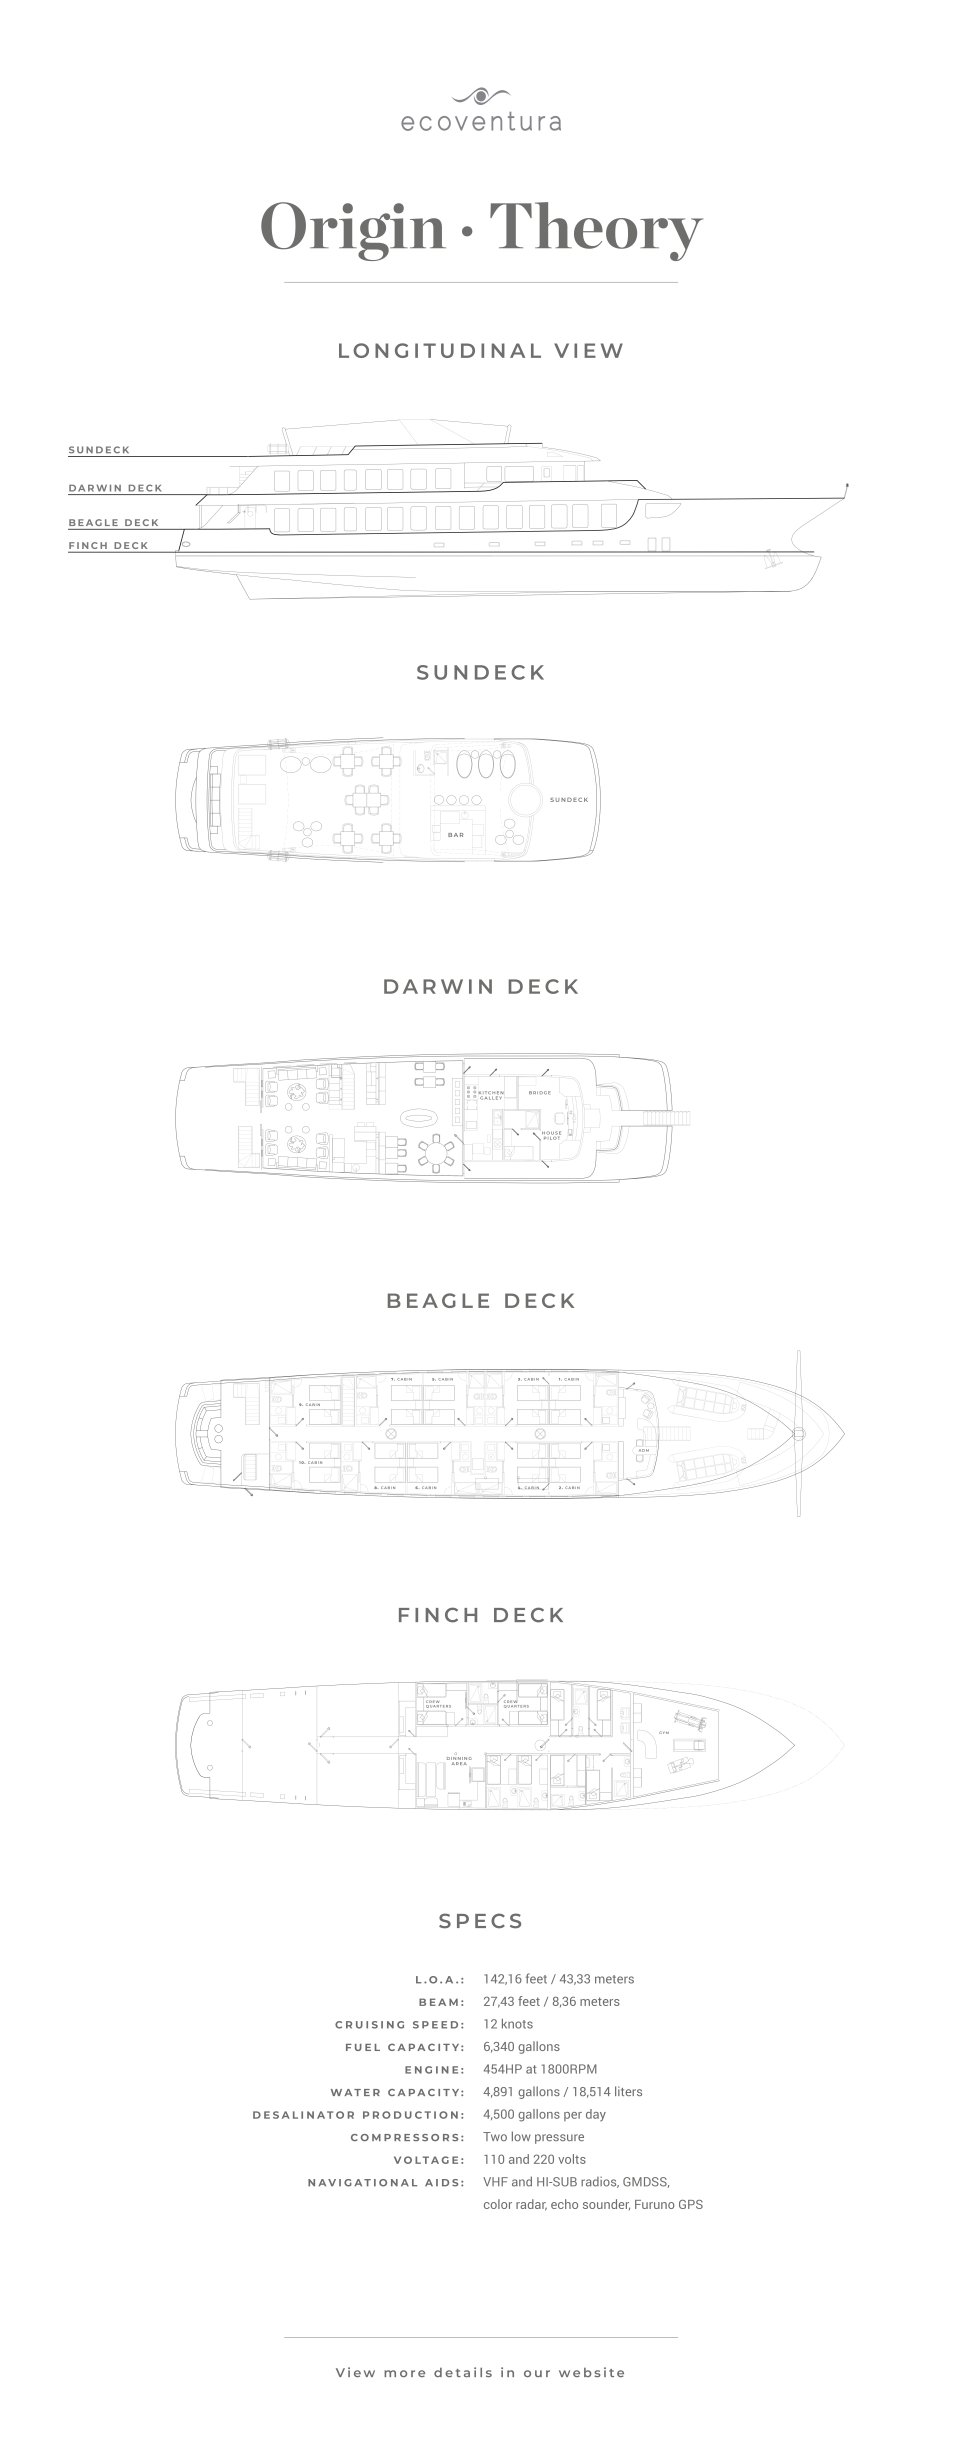 deck plans for Galapagos yachts origin, theory and evolve